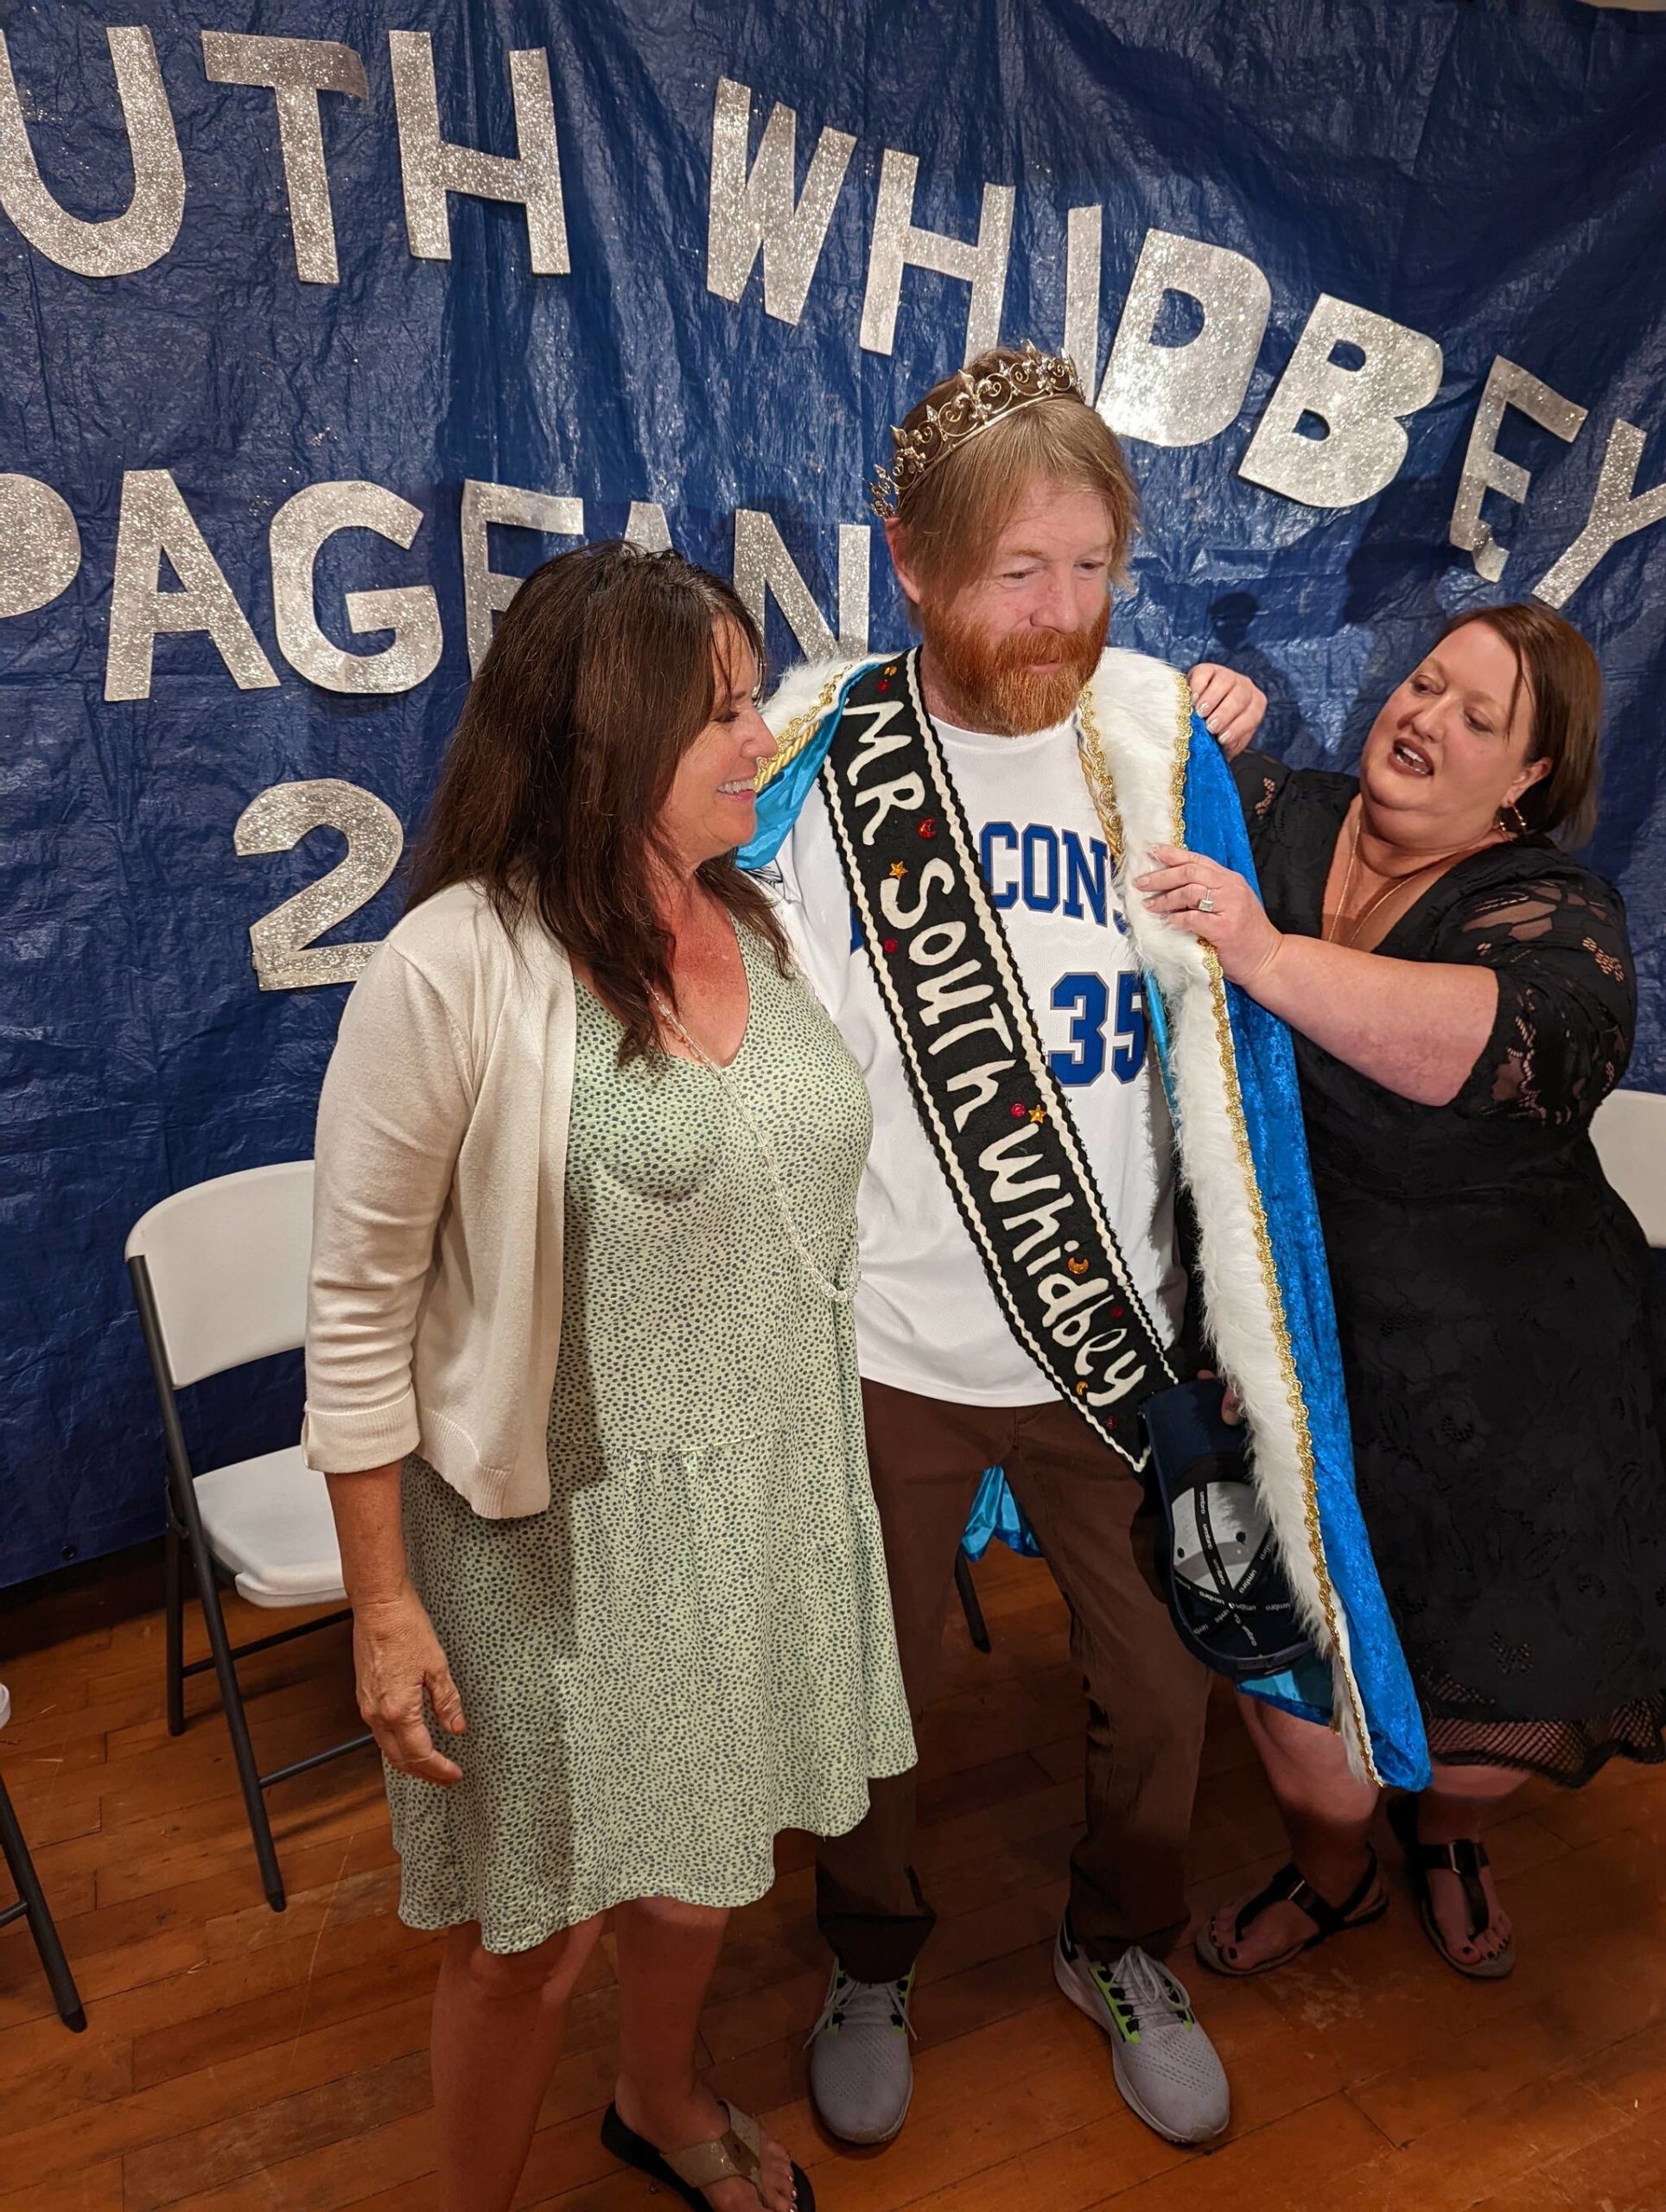 Photo by Sue Frause
Erik Stine, standing in for John LaVassar, was crowned Mr. South Whidbey this past weekend. Kristi Price, the board president for Friends of Friends Medical Support Fund, helped Stine into the Mr. South Whidbey robes while Gail, LaVassar’s wife, stood nearby.